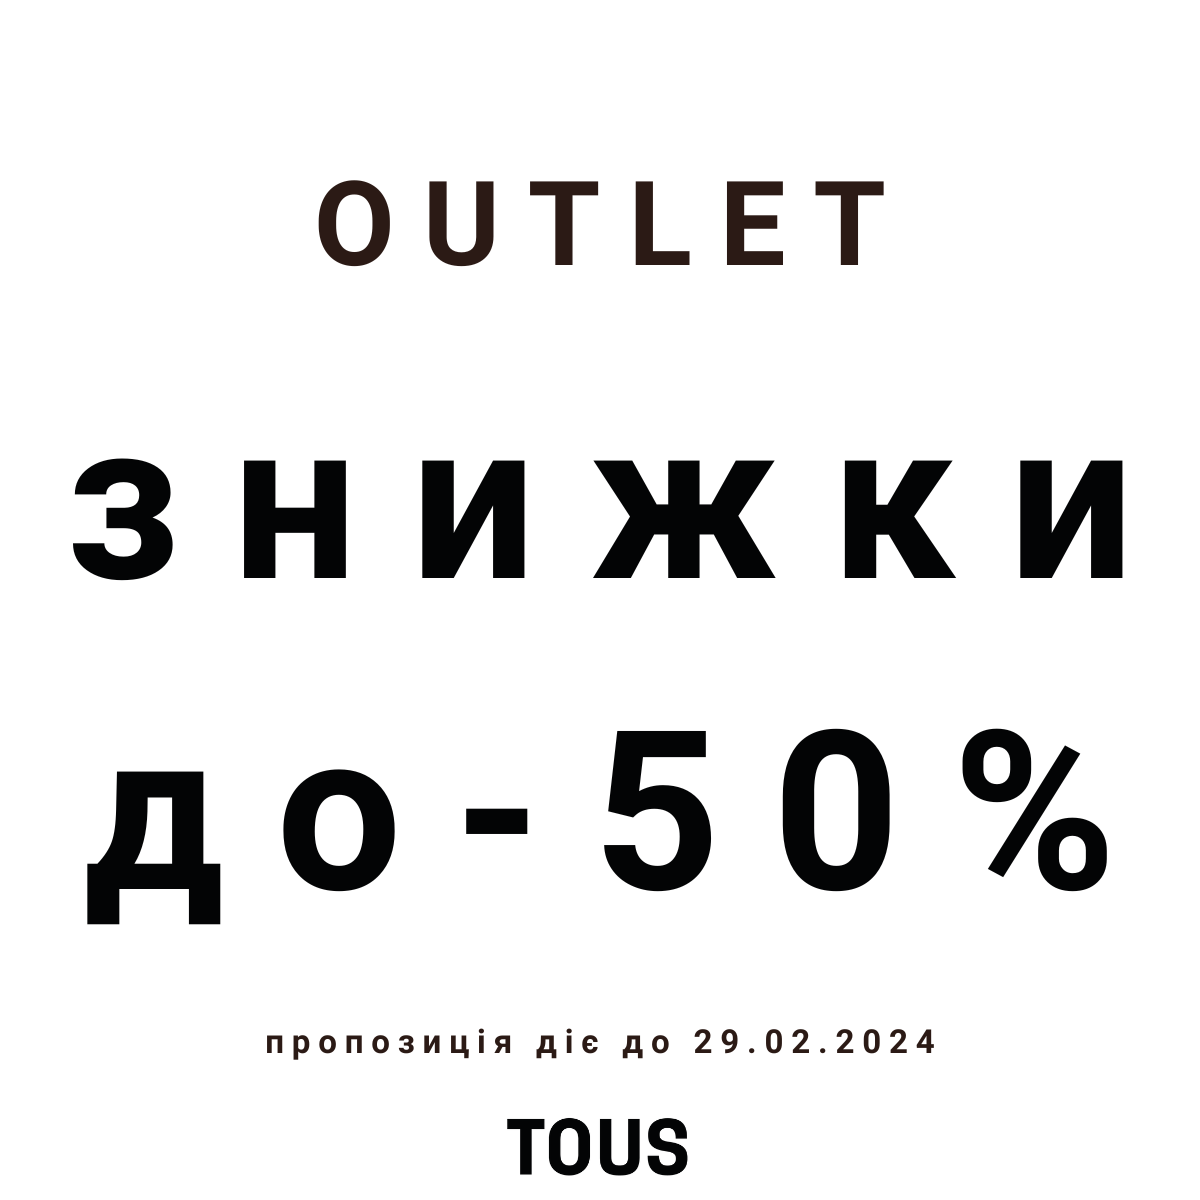 Discounts up to 50%